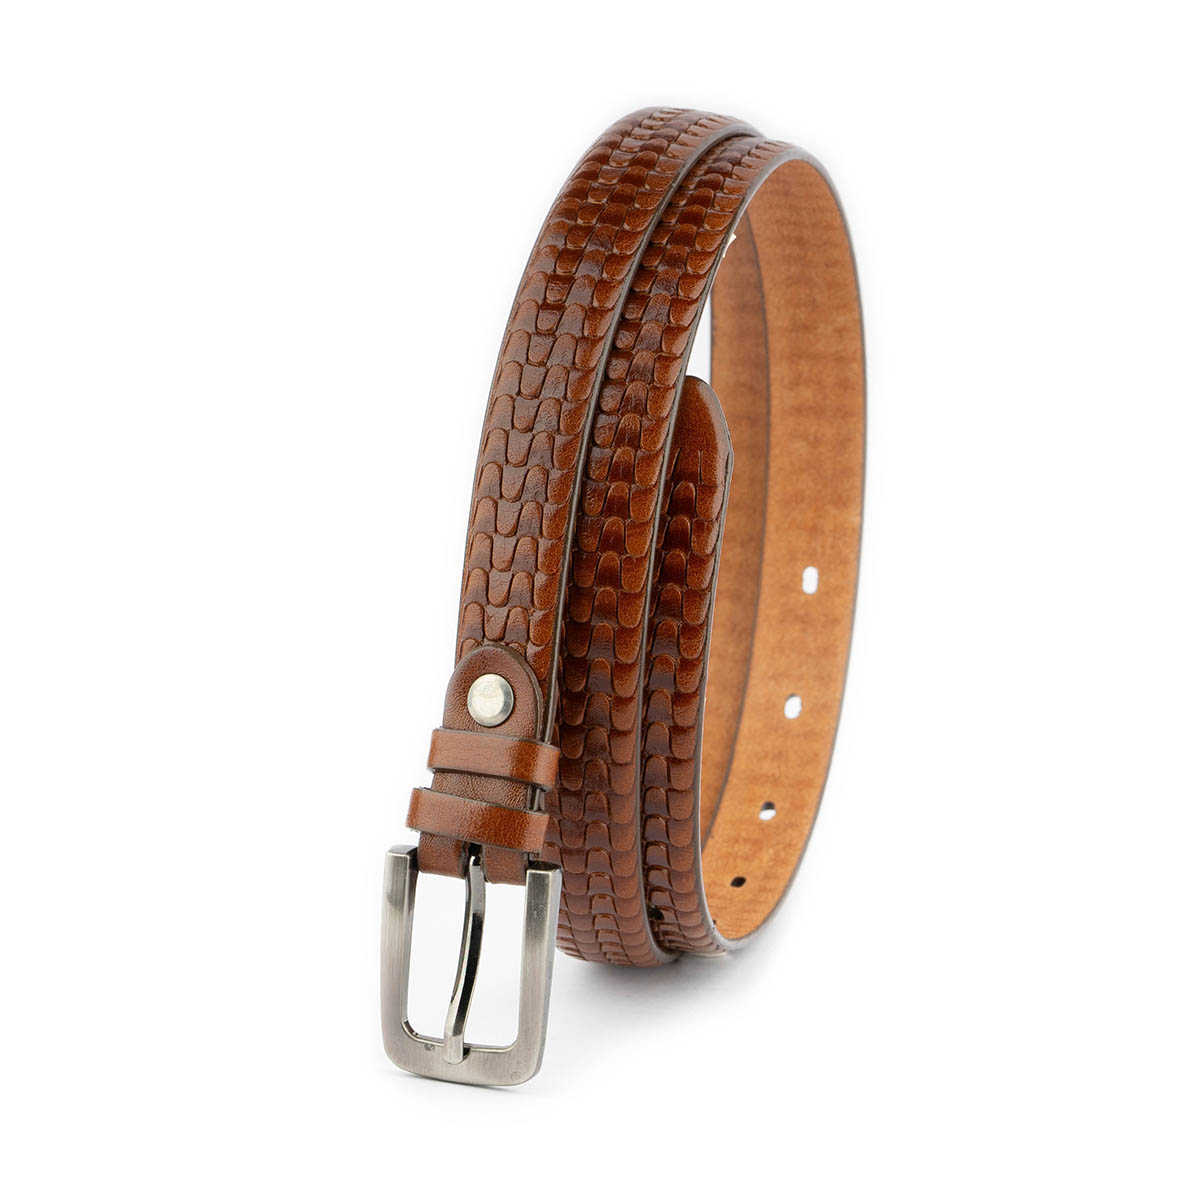 THIN BELT IN BRAIDED LEATHER - COGNAC BROWN